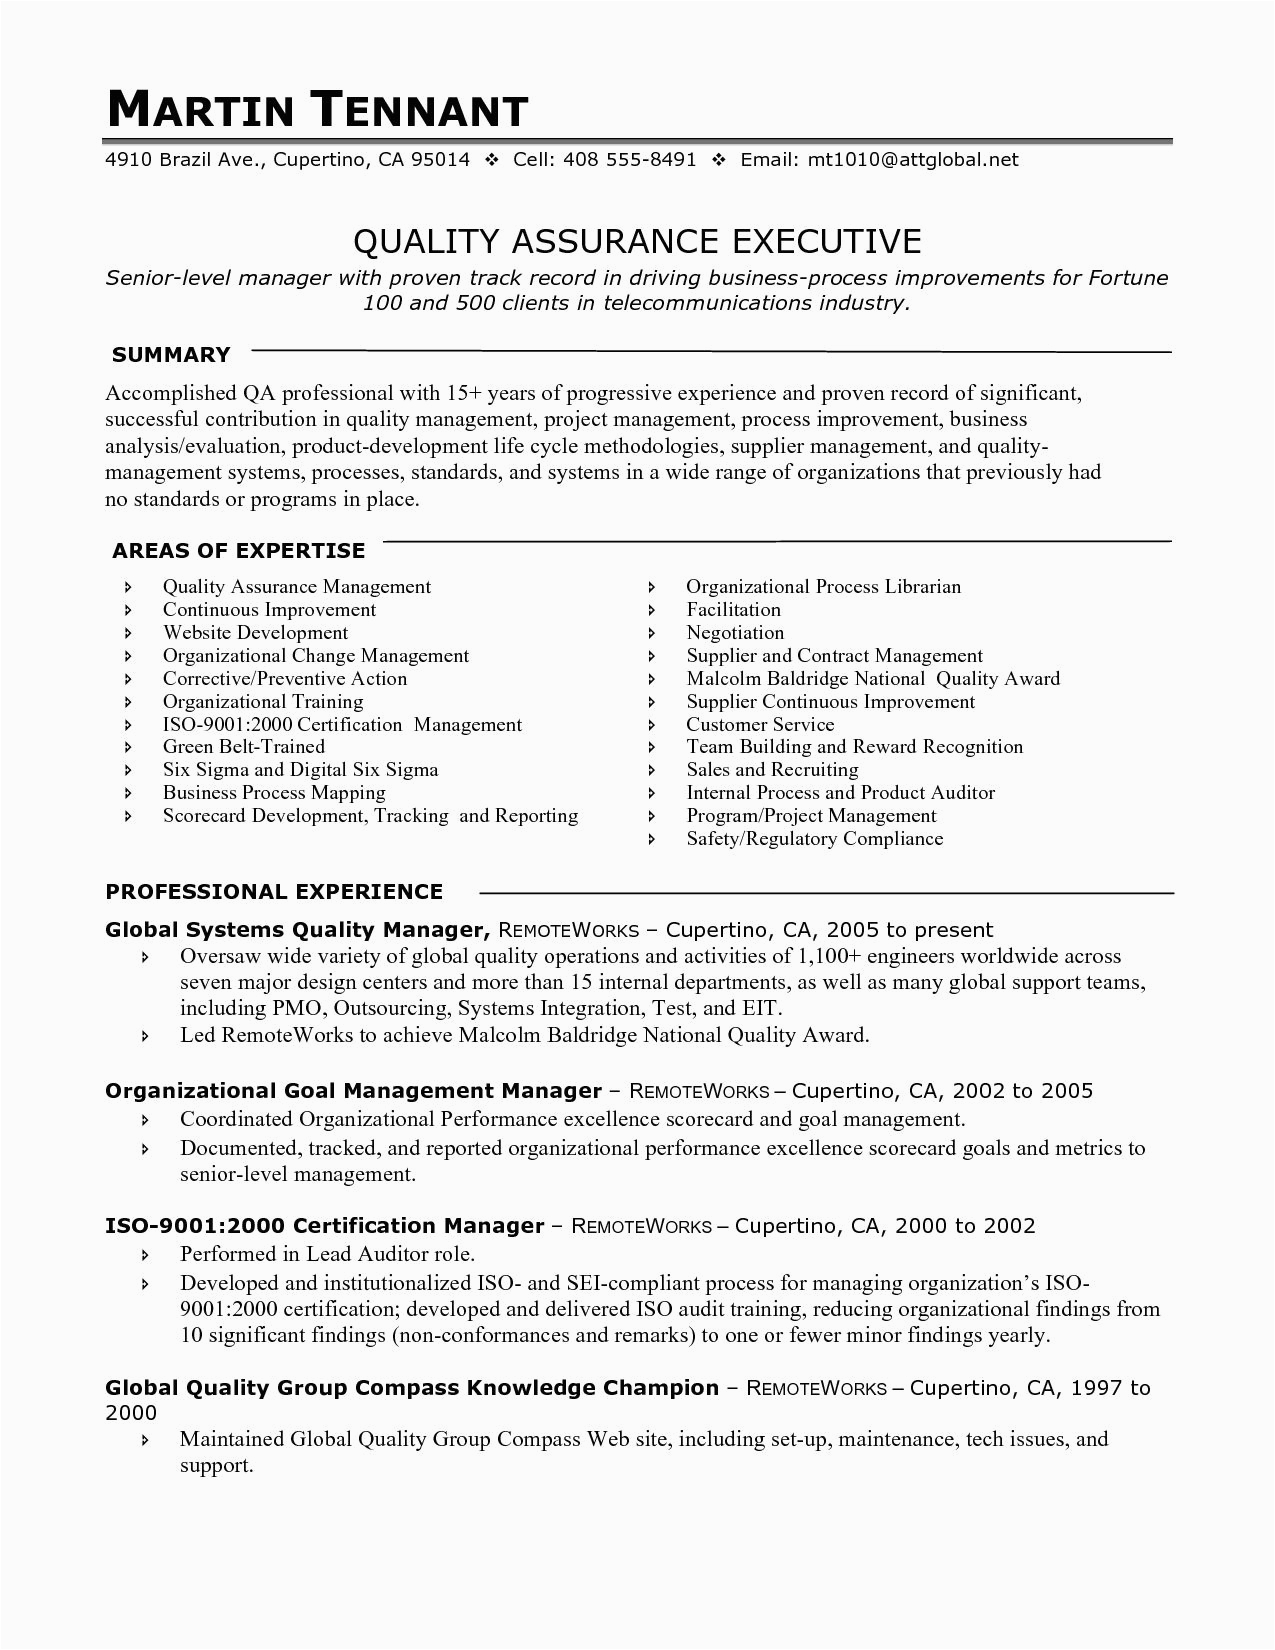 Certified Professional Healthcare Quality Resume Sample Certification Manager Cover Letter Help Desk Support Specialist Health